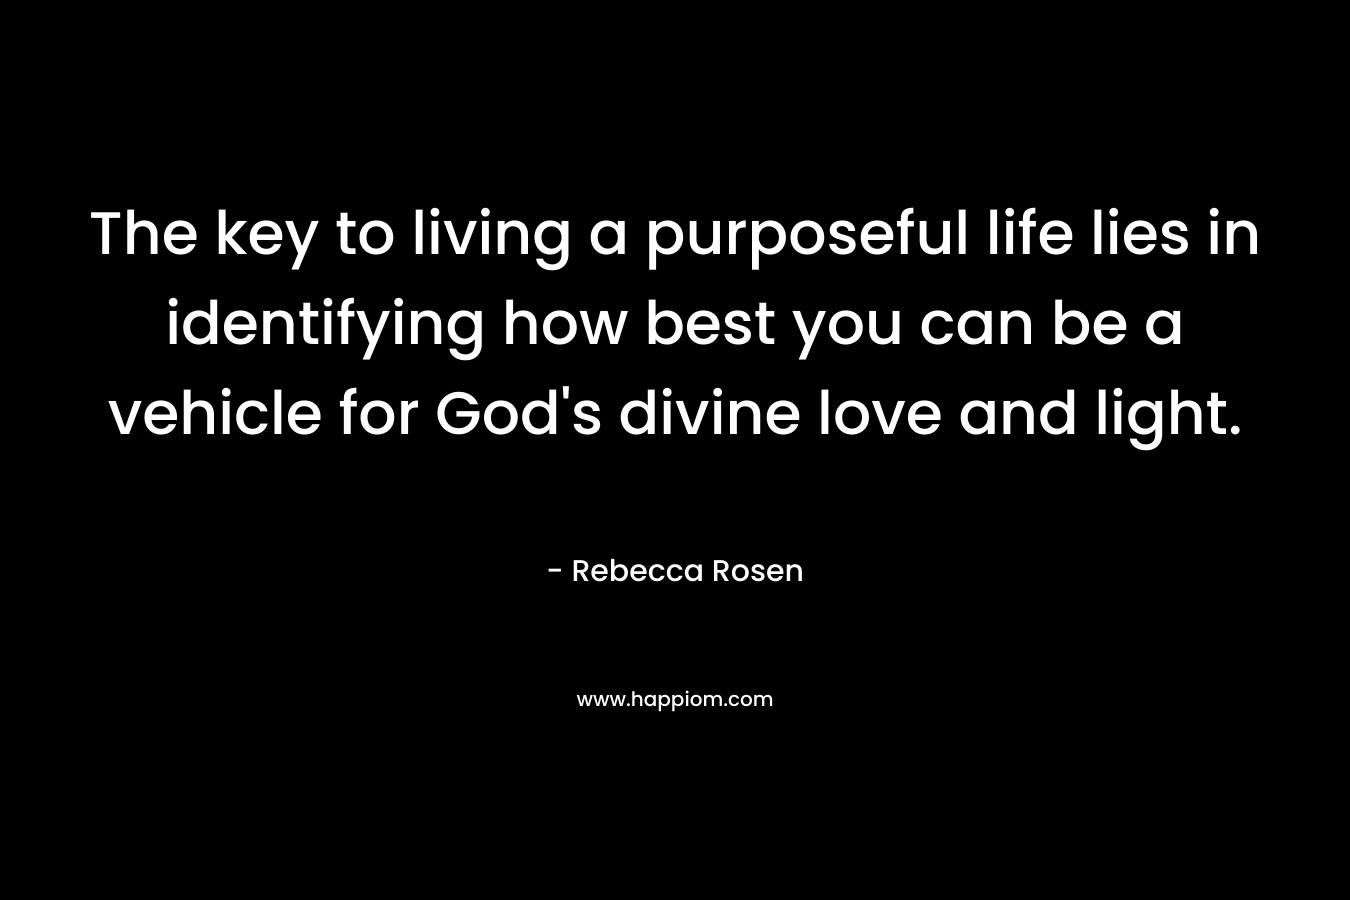 The key to living a purposeful life lies in identifying how best you can be a vehicle for God’s divine love and light. – Rebecca Rosen